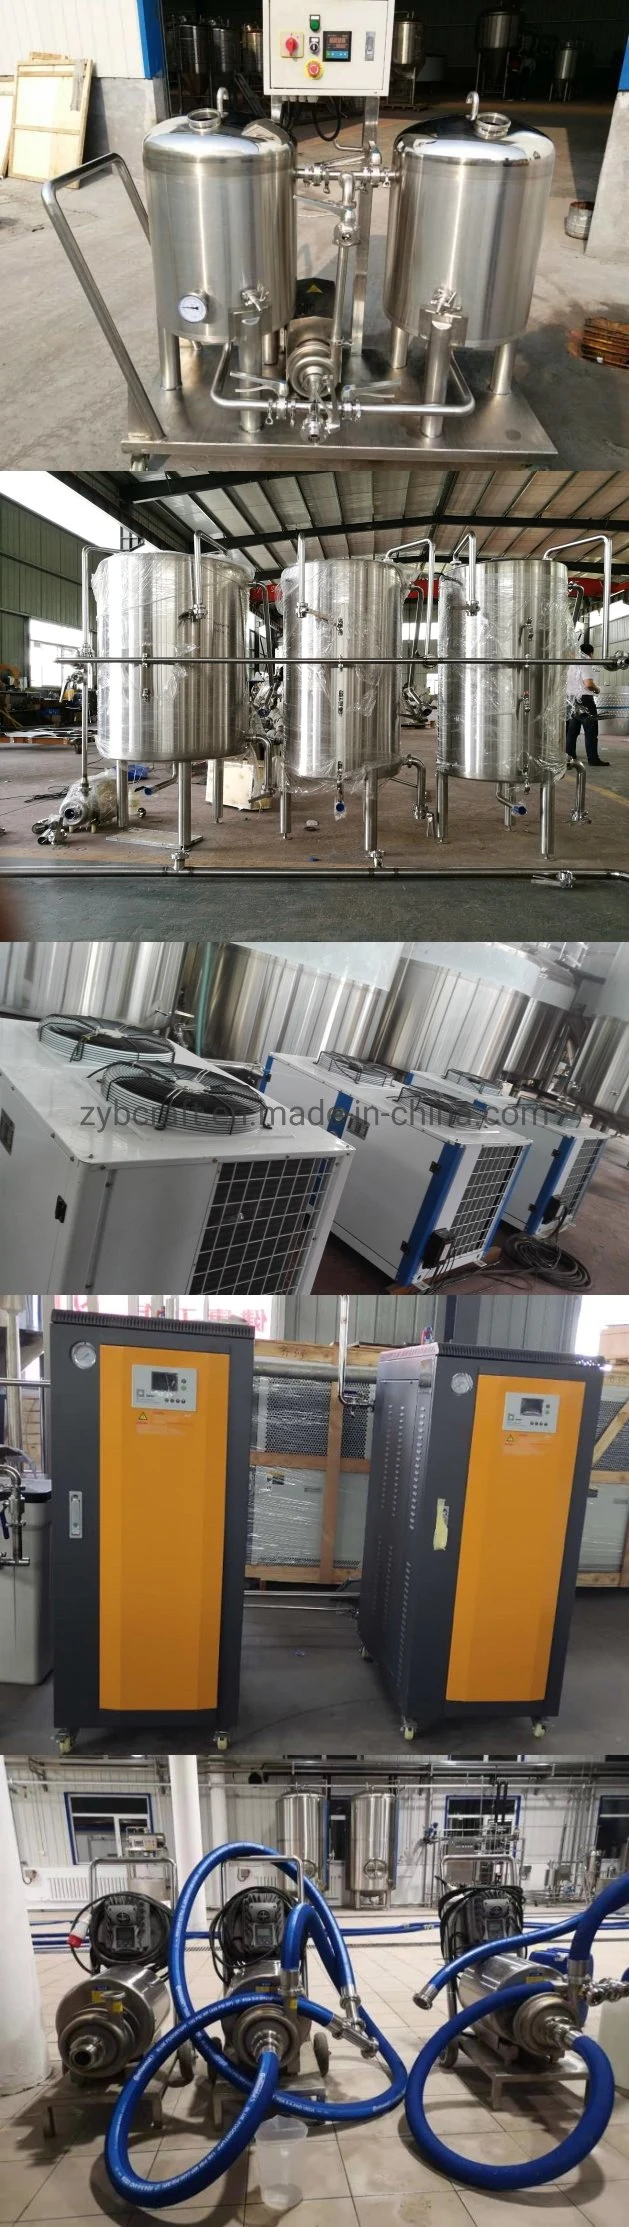 1500L 15hl 15bbl Micro Brewery Equipment Commercial Beer Brewing System